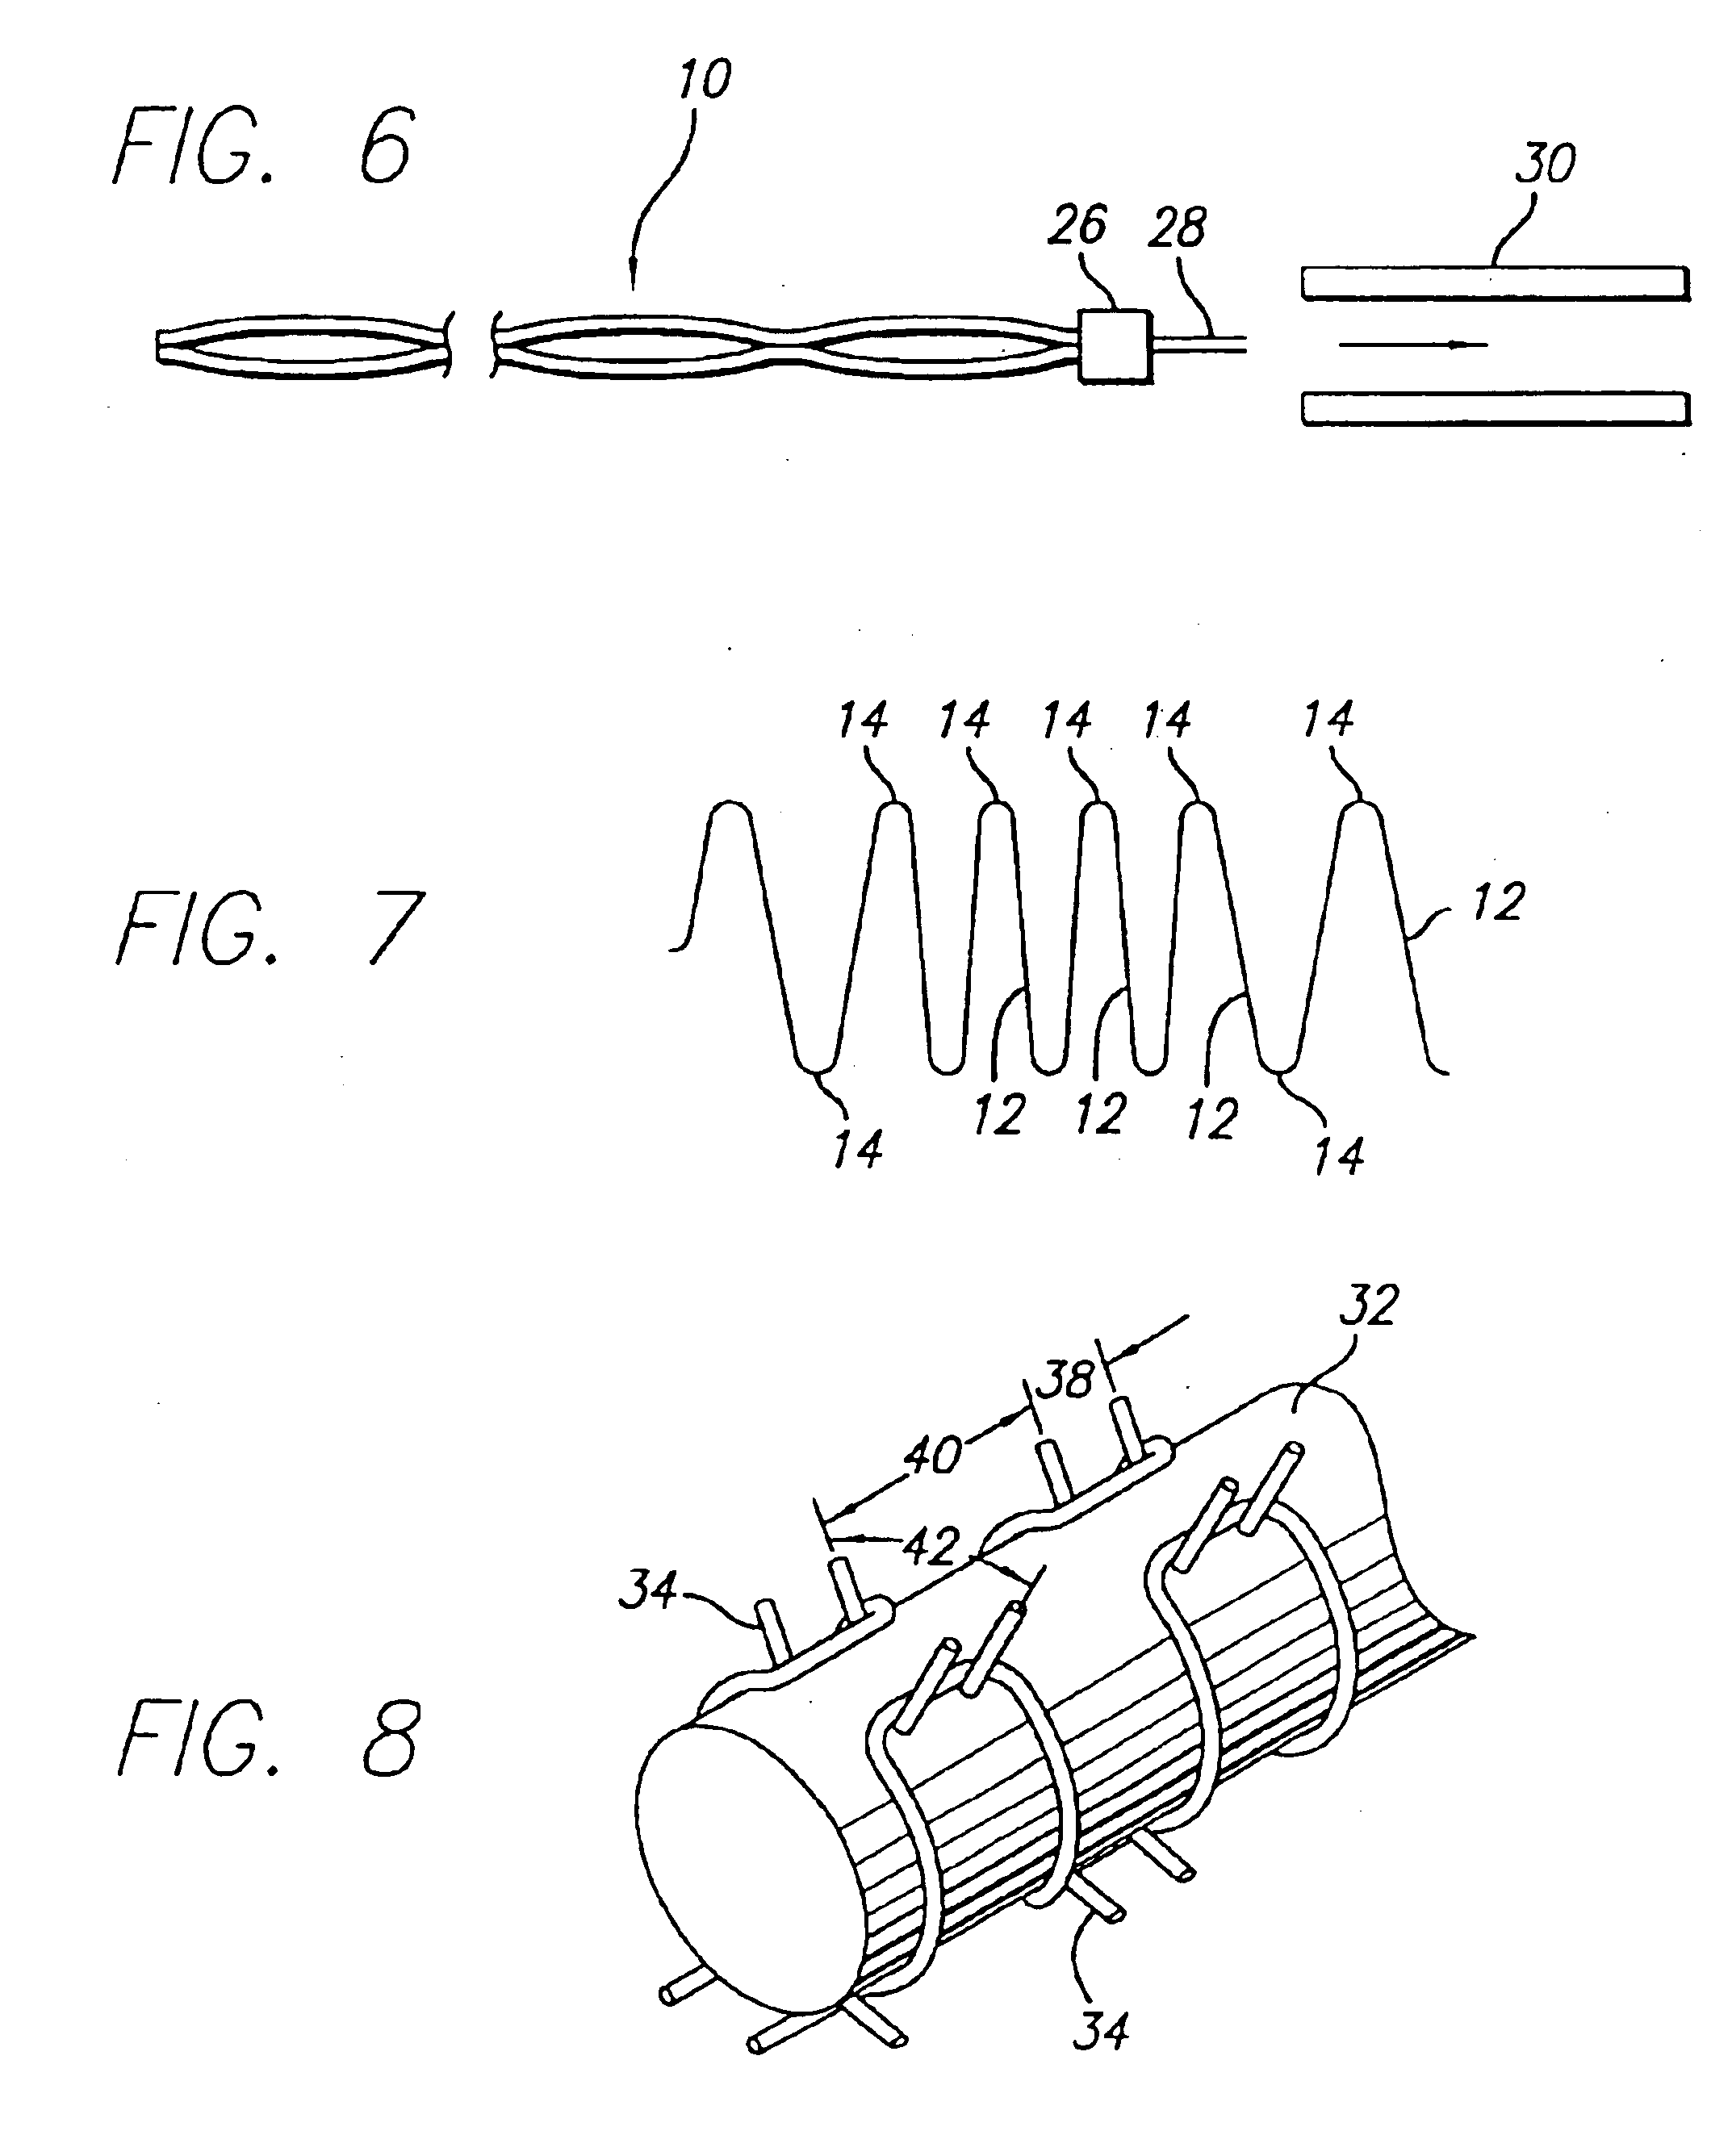 Intravascular flow modifier and reinforcement device